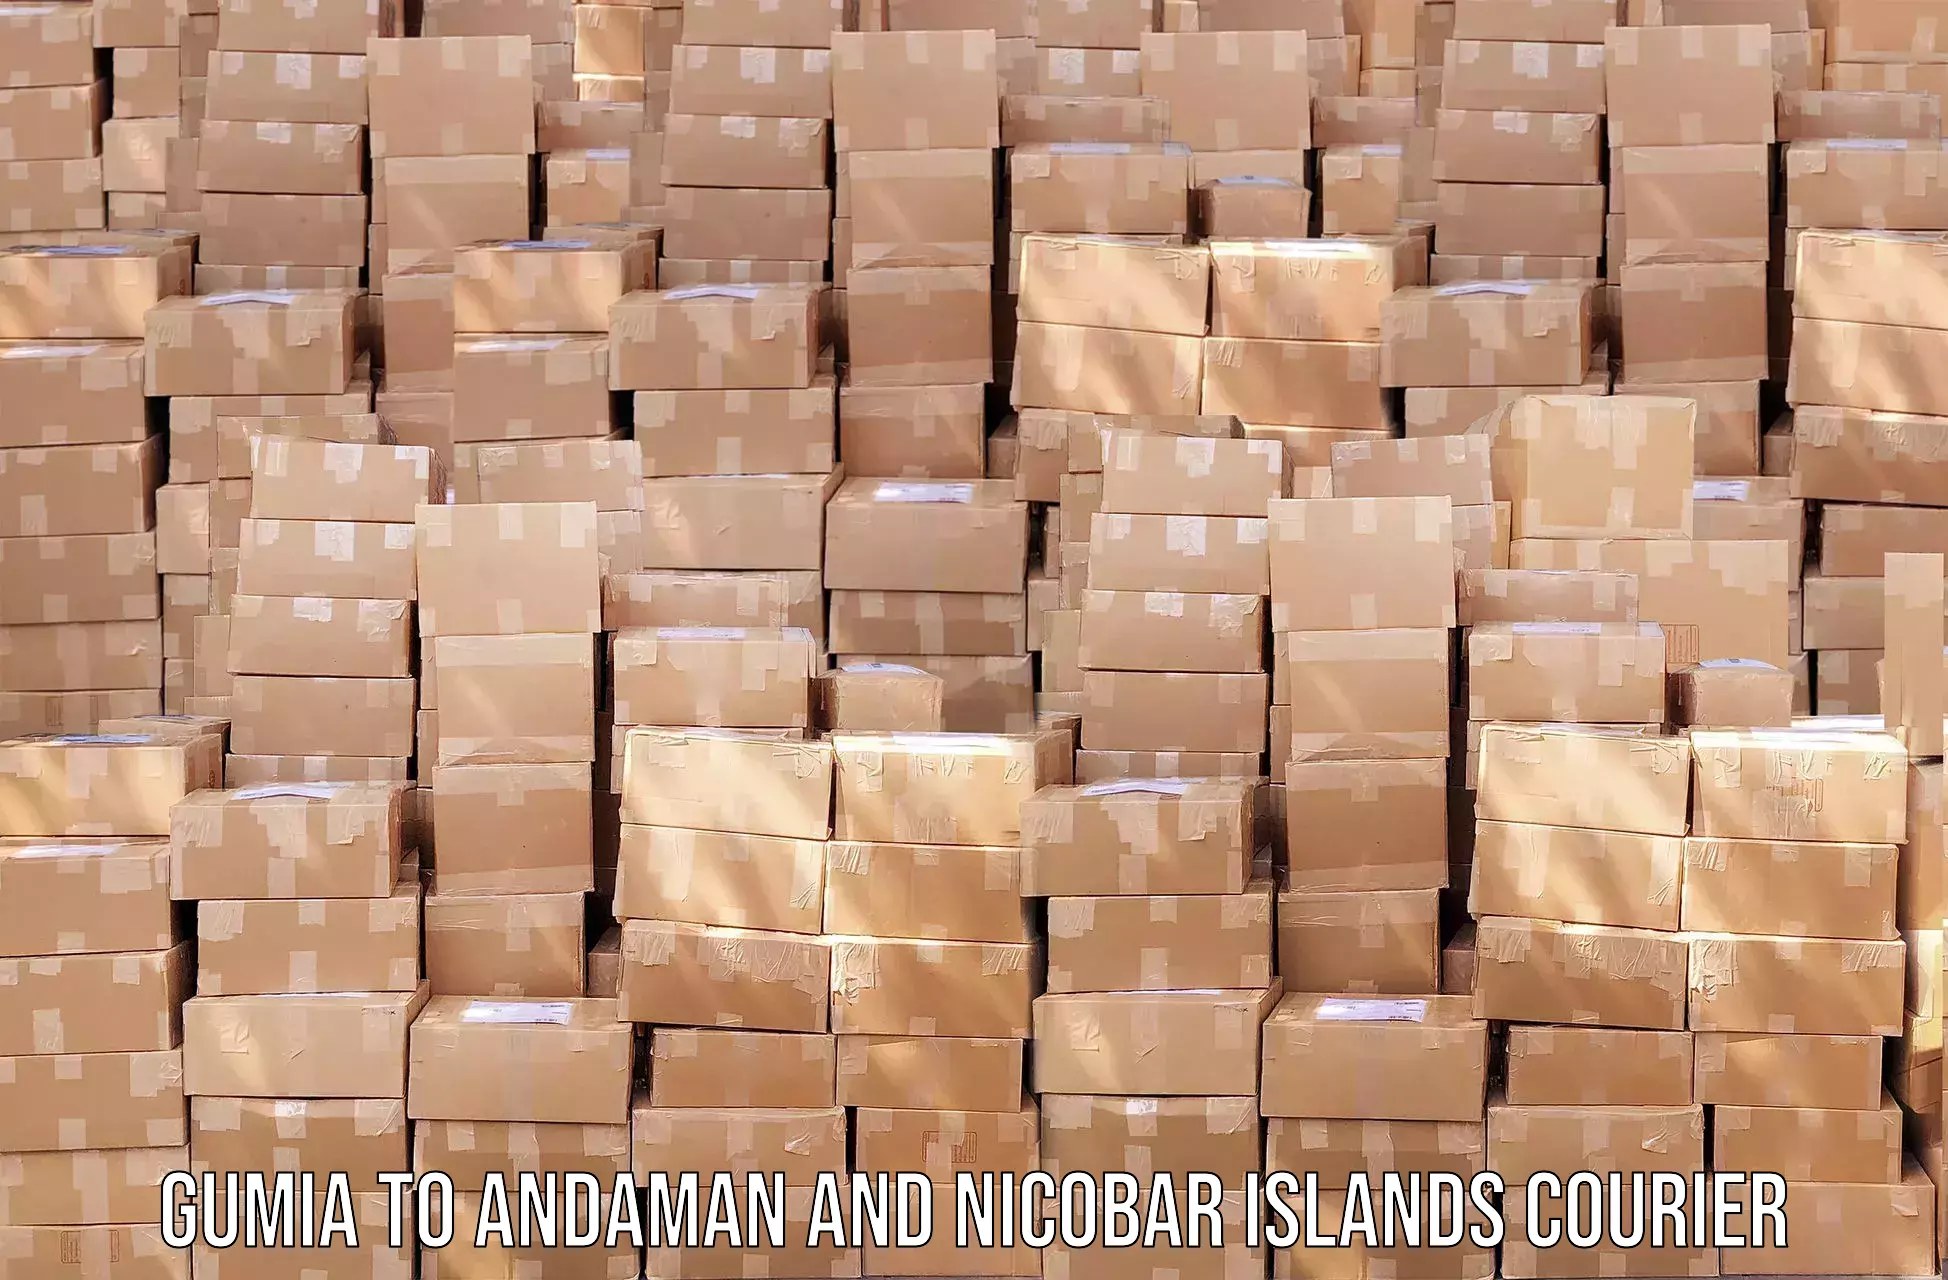 Bulk courier orders Gumia to Andaman and Nicobar Islands